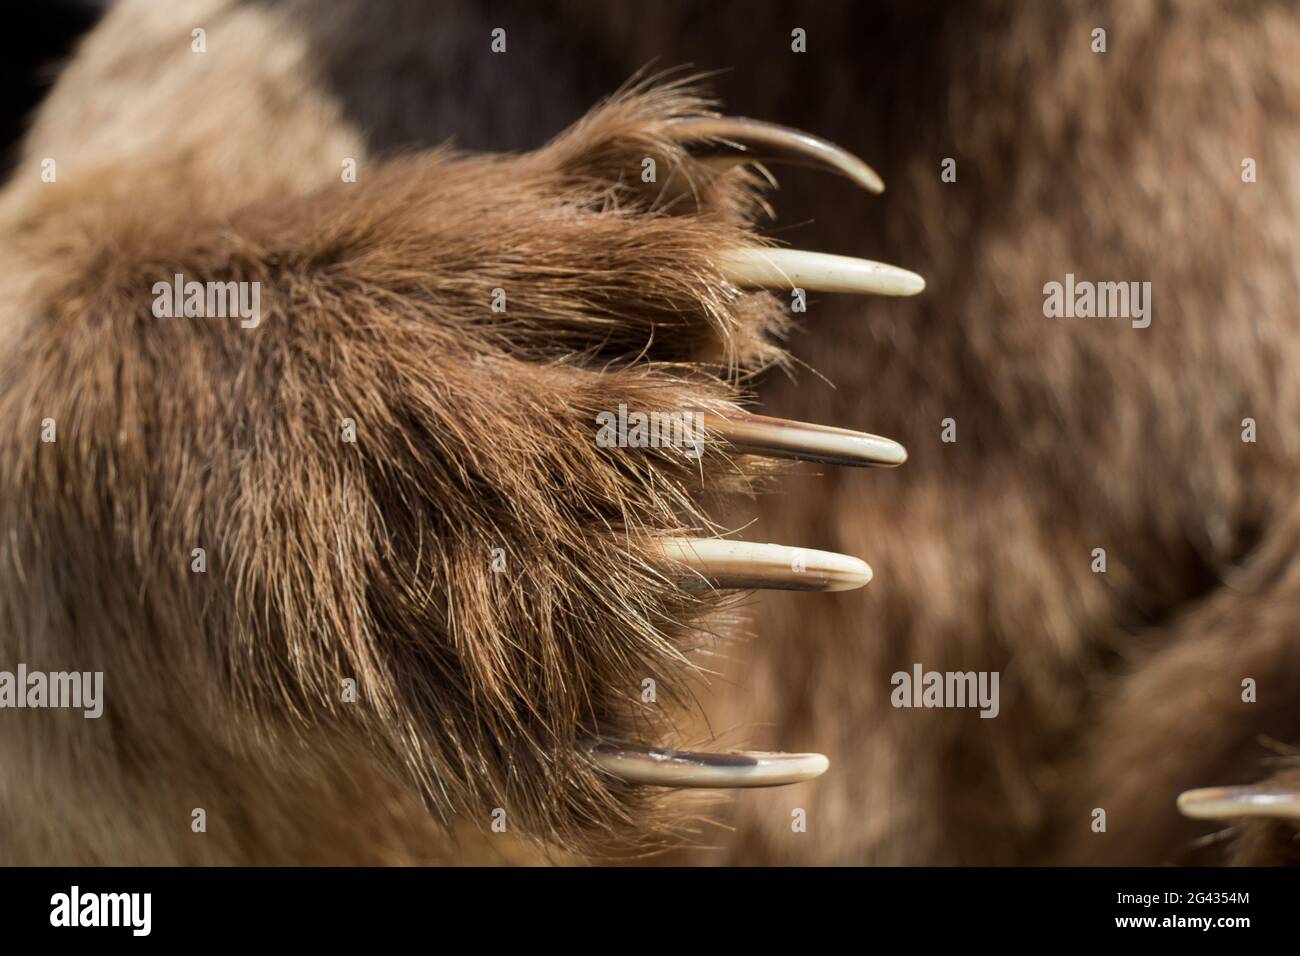 Brown Bear Paw With sharp Claws Stock Photo